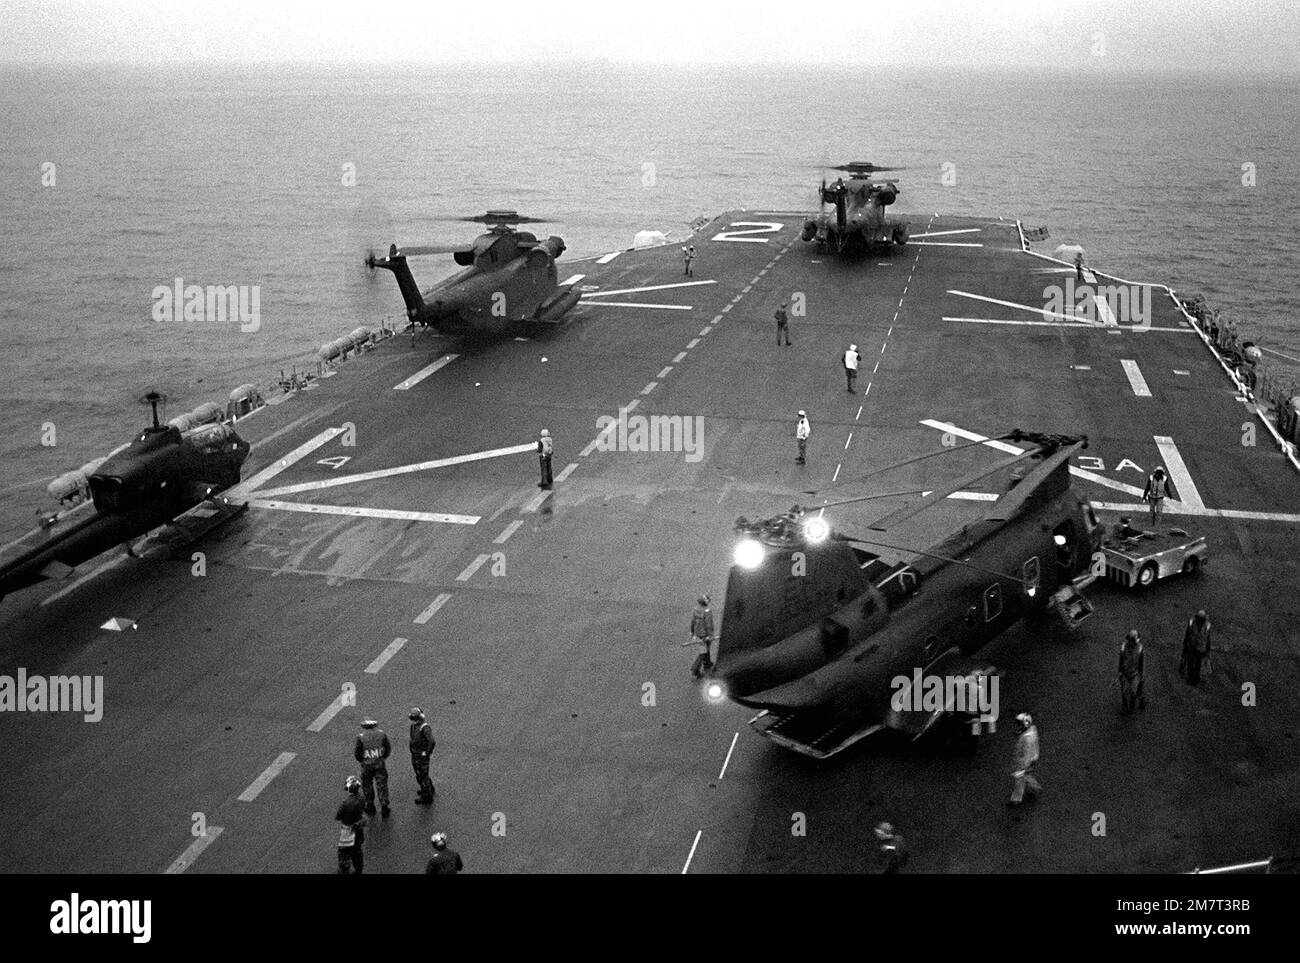 A view of helicopters on the deck of the amphibious assault ship USS SAIPAN (LHA-2).The helicopters are, starting at left: an AH-1 Sea Cobra, two H-53 Sea Stallion and an H-46 Sea Knight. The ship and helicopters are involved in a NATO exercise Display Determination '81. Subject Operation/Series: DISPLAY DETERMINATION '81 Country: Mediterranean Sea (MED) Stock Photo